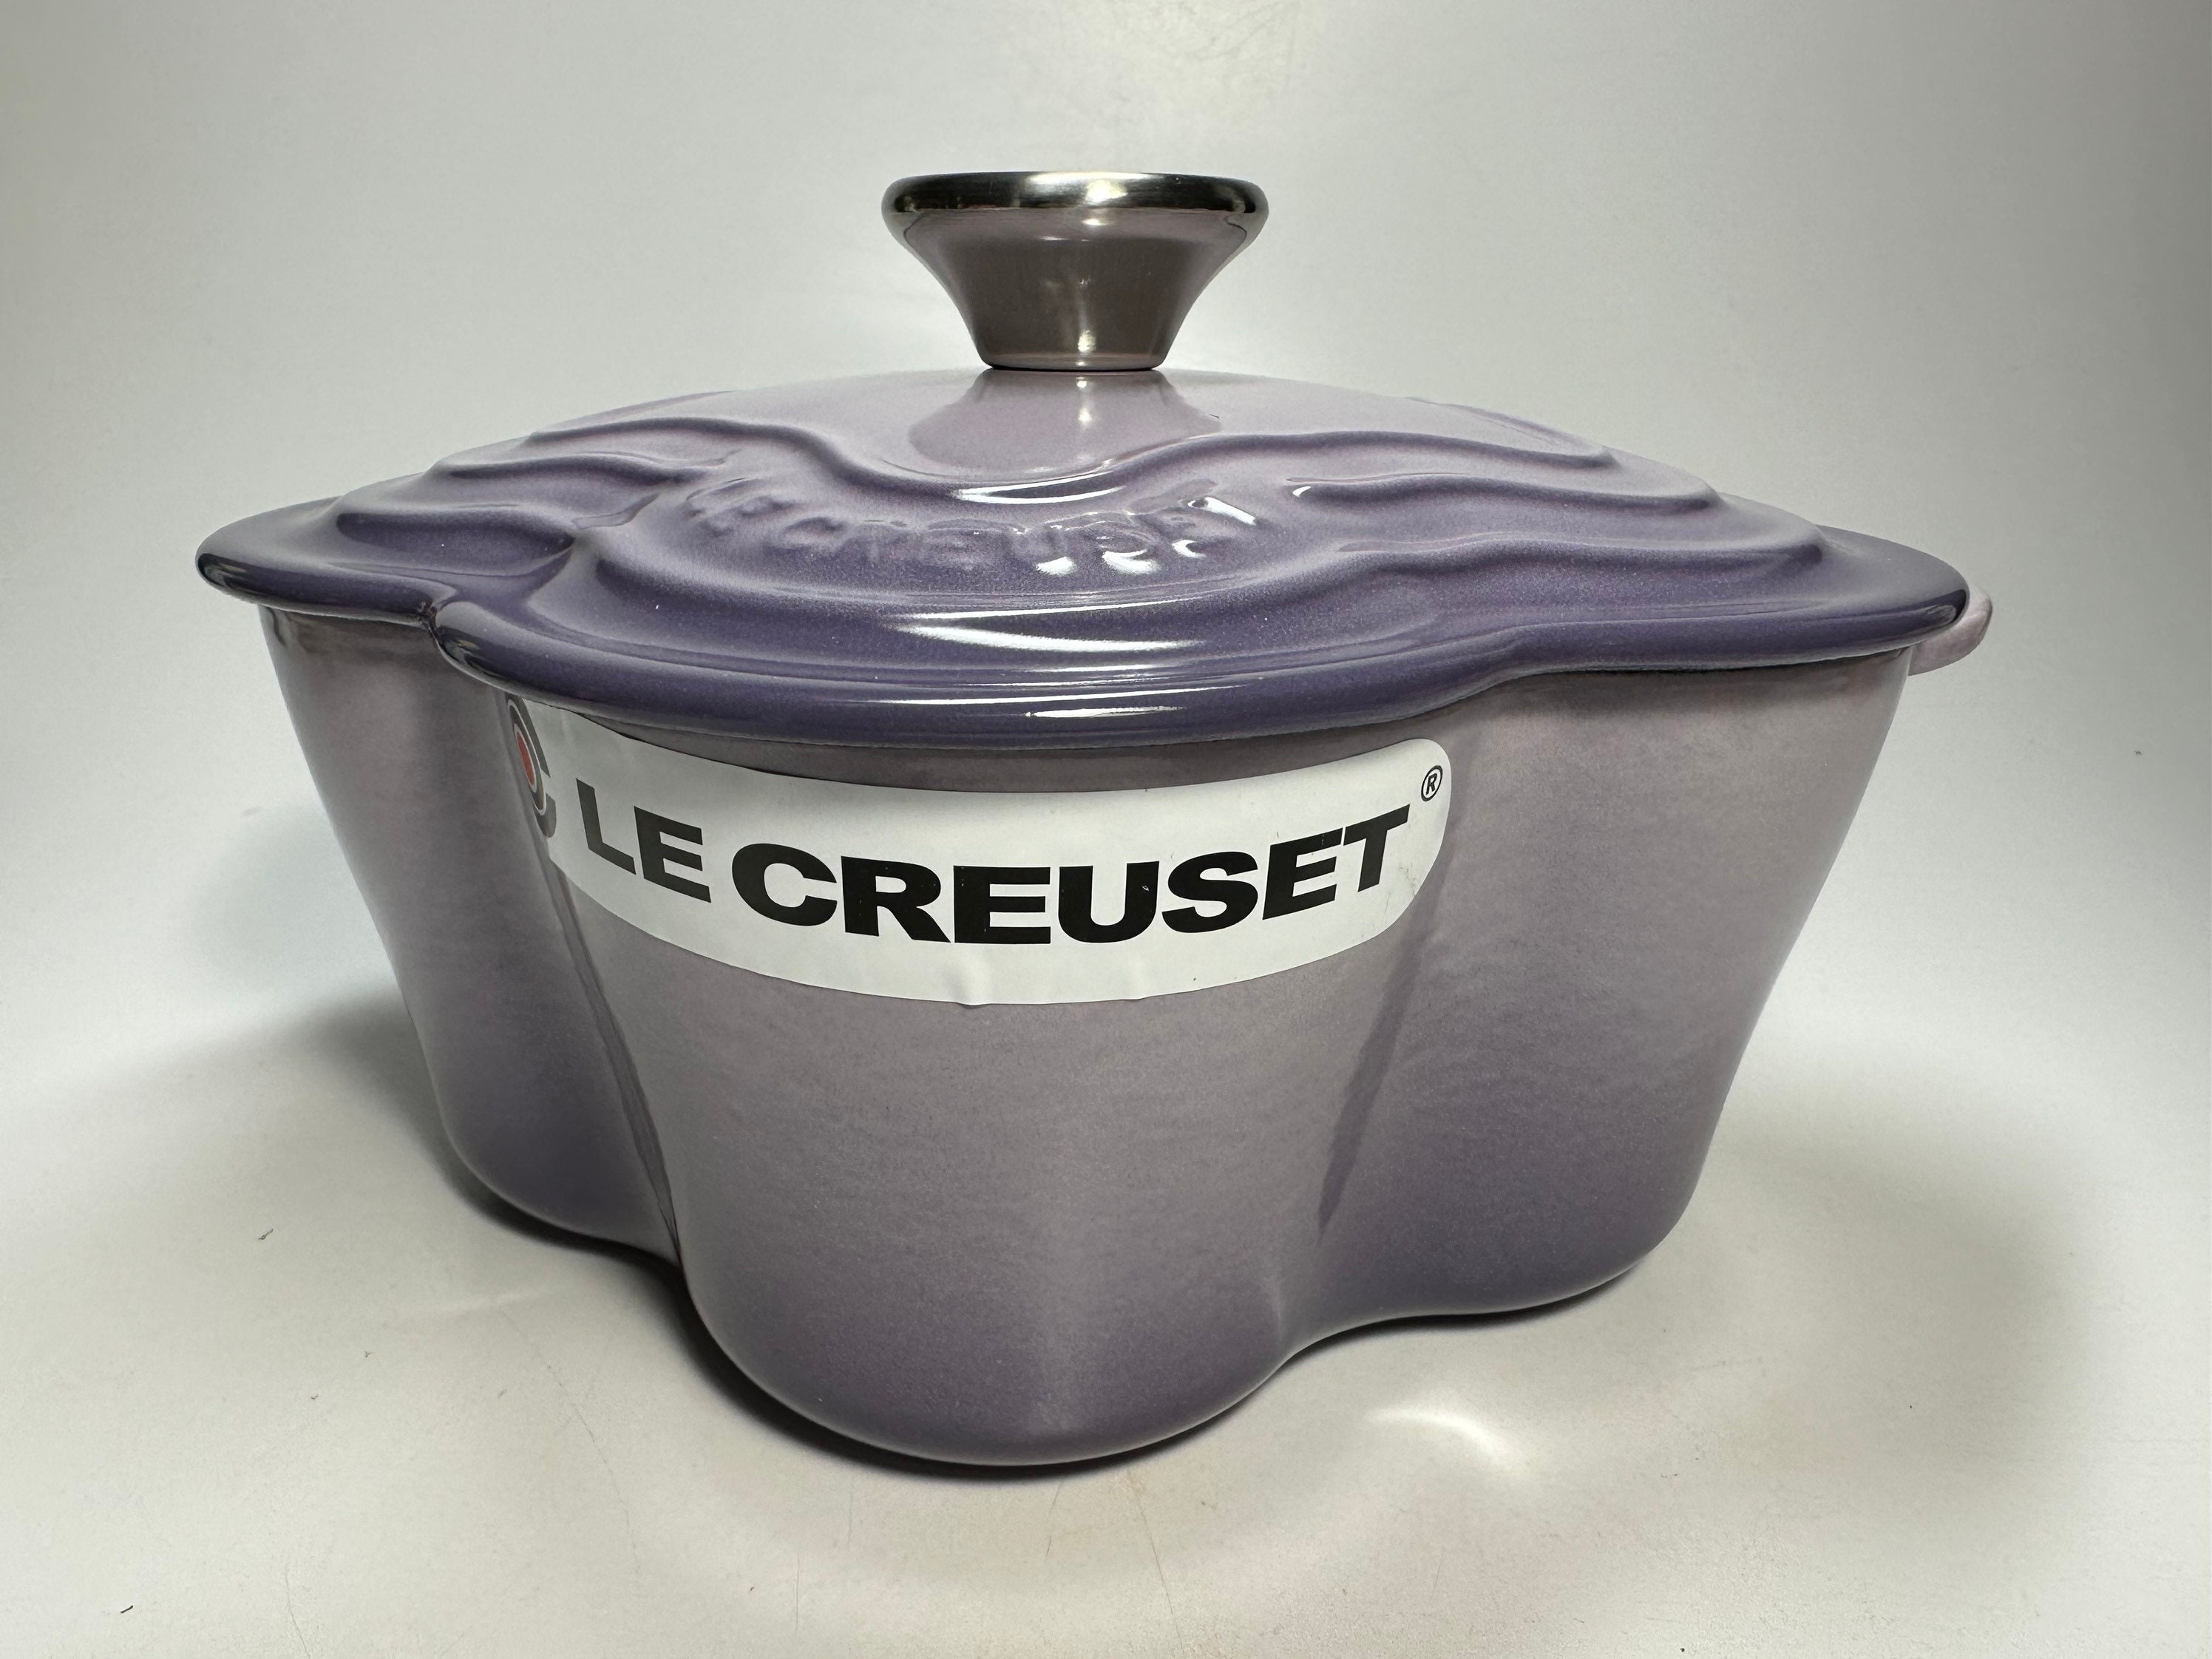 le creuset heart dutch oven Sticker for Sale by alexhxu